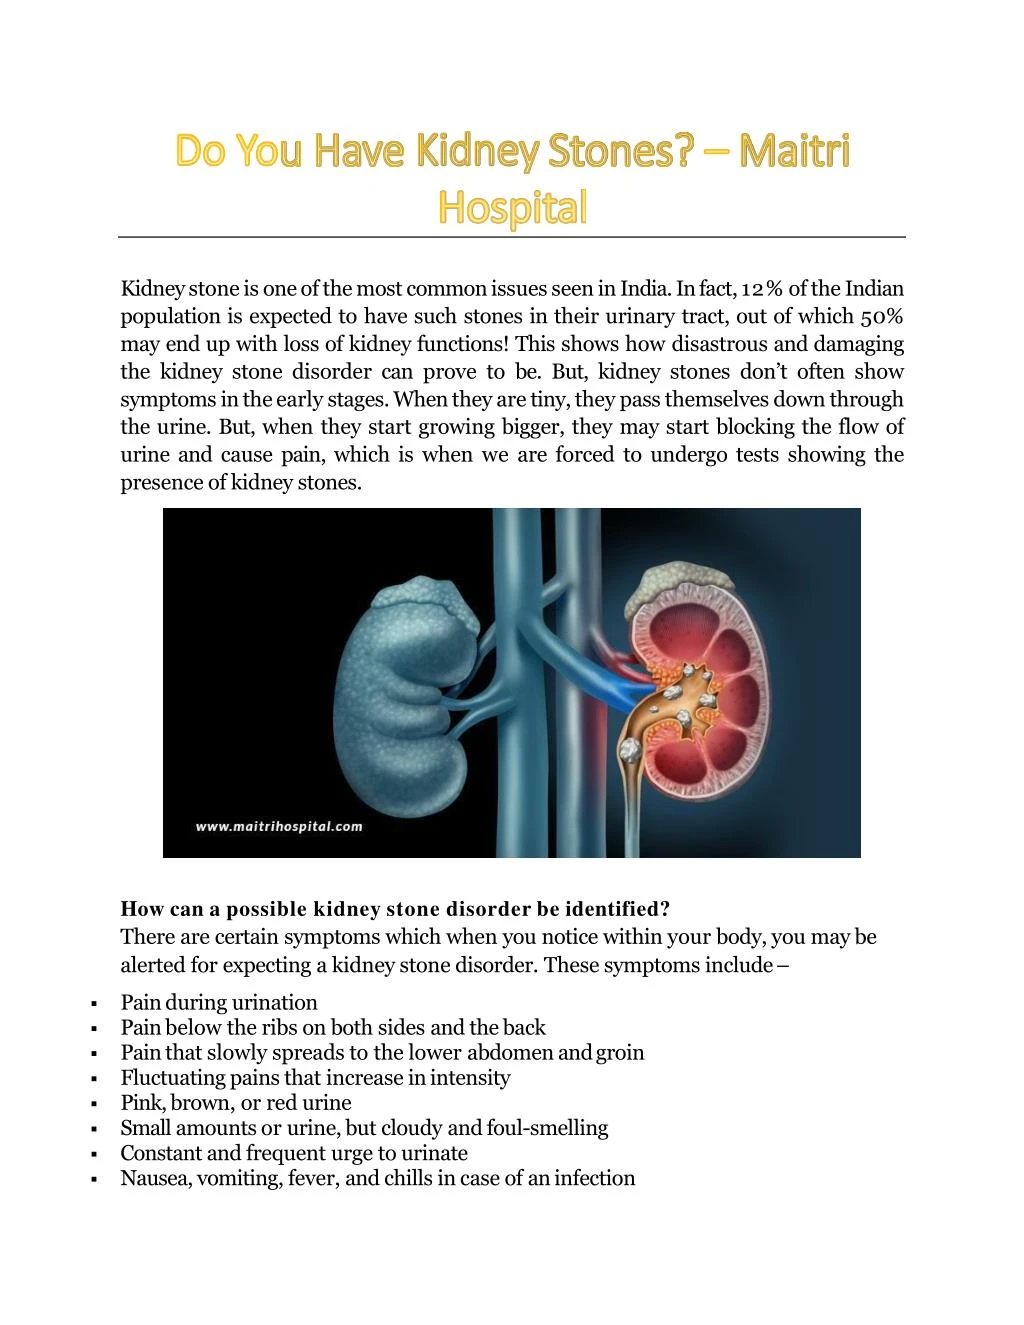 kidney stone is one of the most common issues